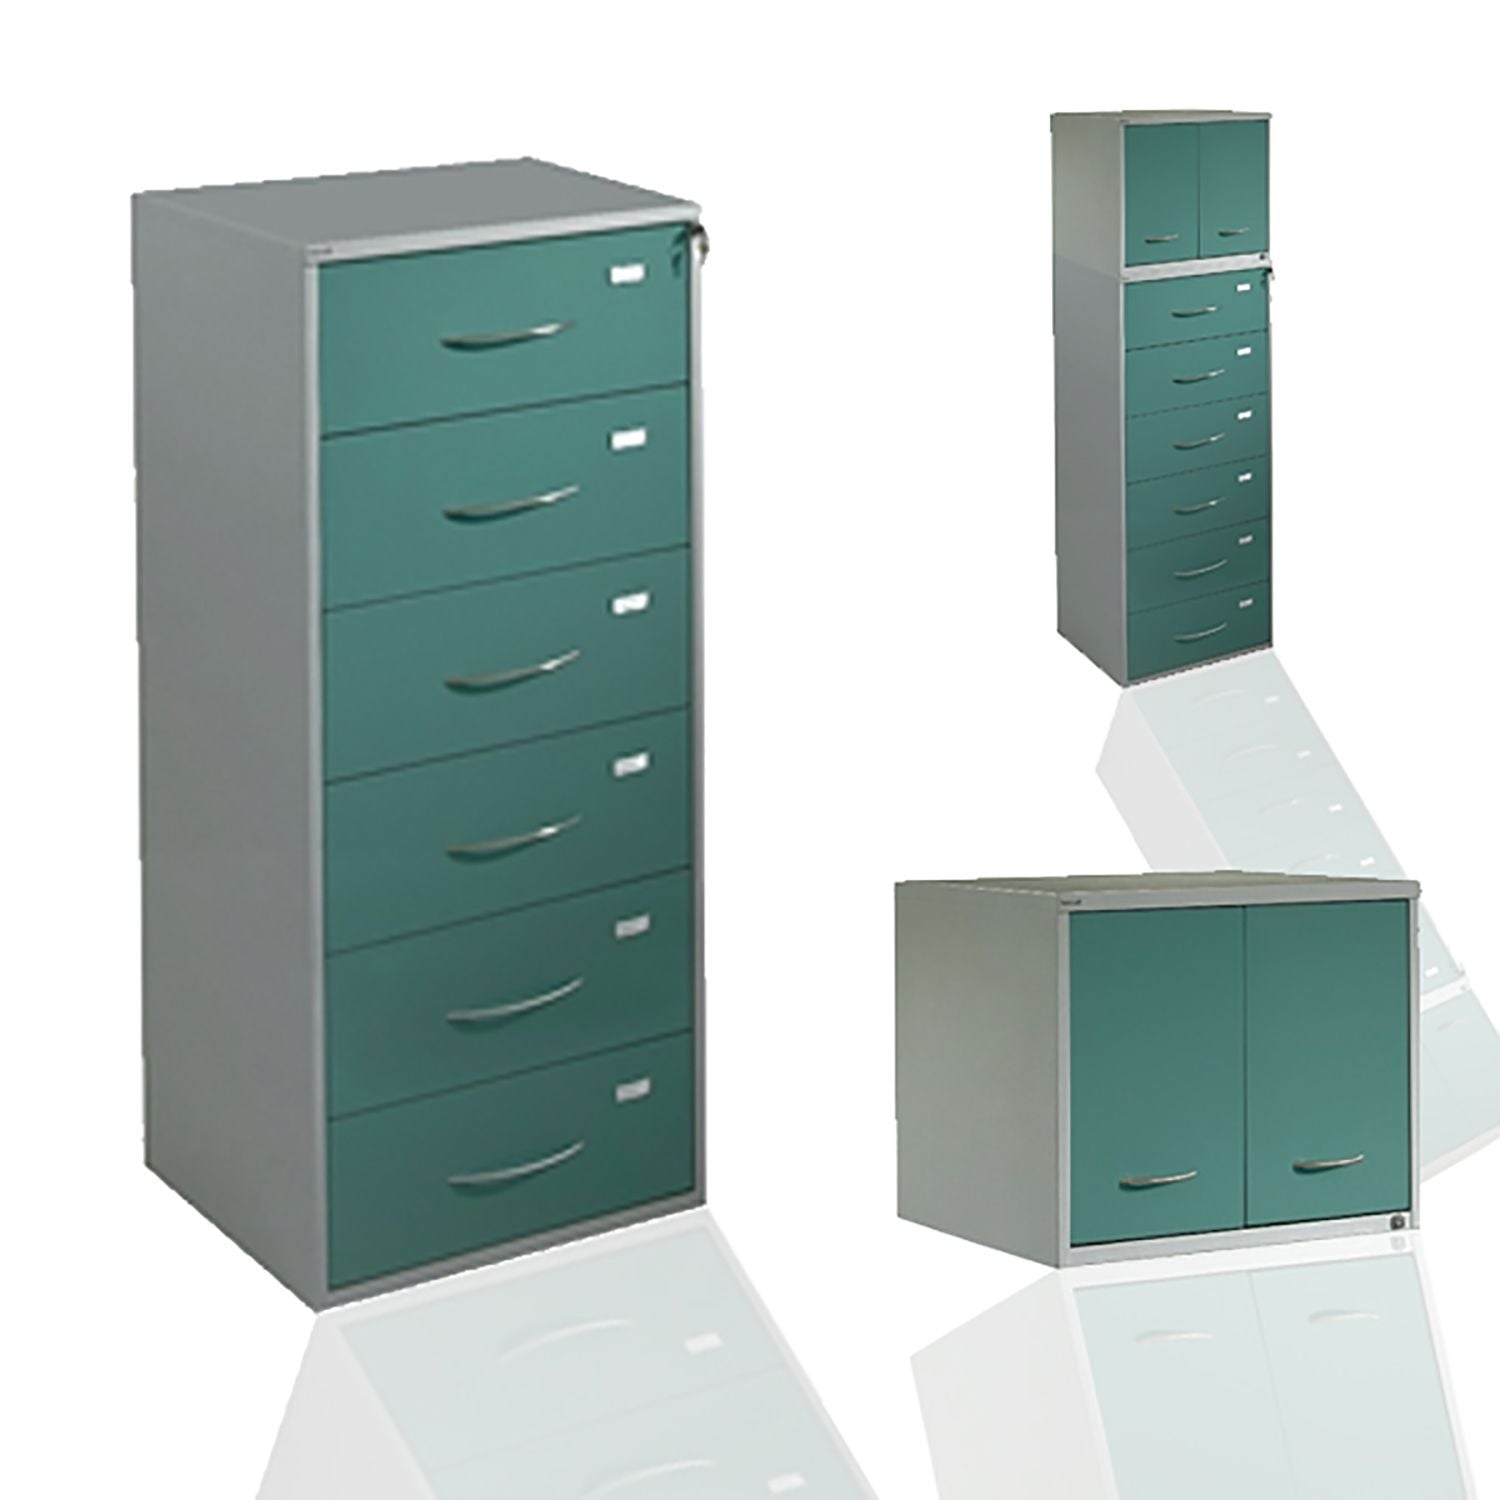 BH Amerson 2 Vertical Drawers Cabinet | Cream Frame & Drawers | Placed With a Wall against the Left (1)